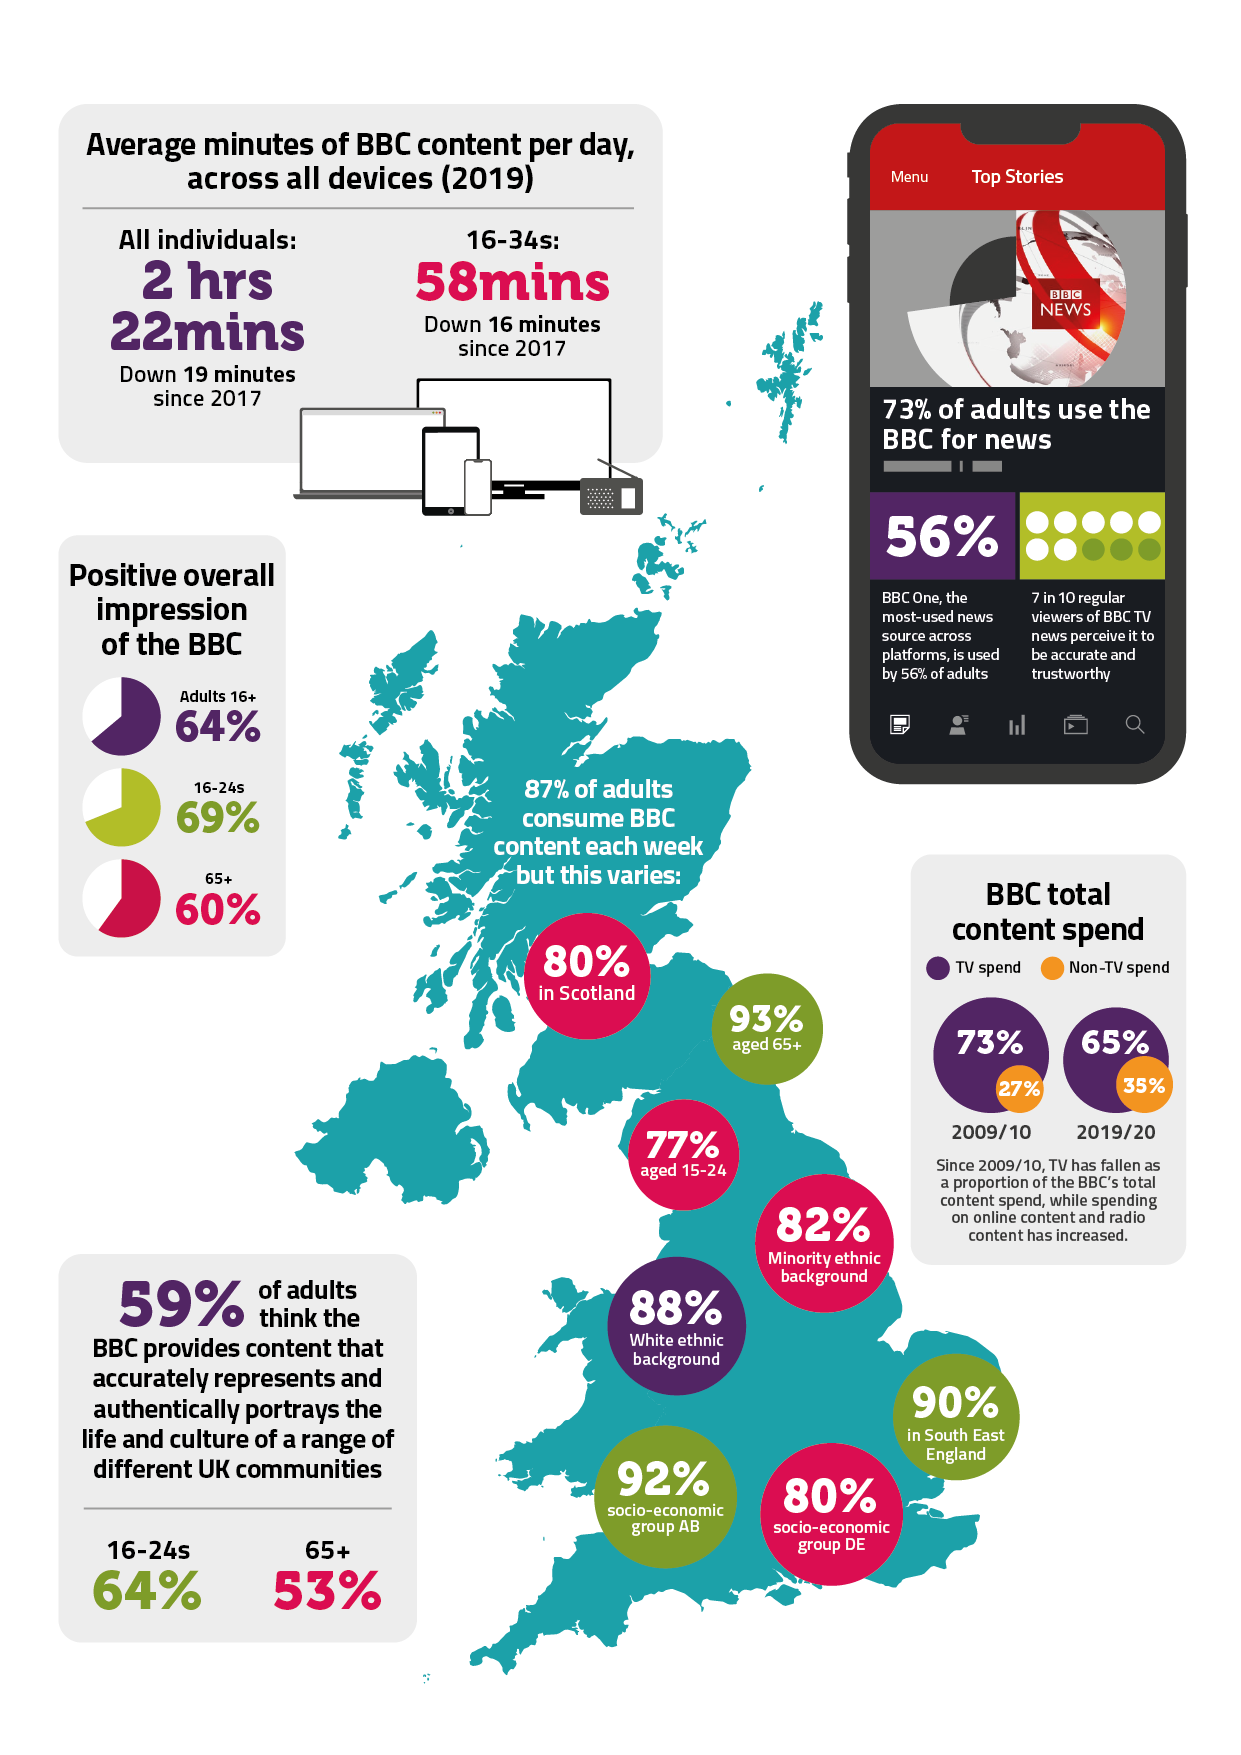 Infographic showing key findings from Ofcom’s annual report on the BBC. Since 2009/10, TV has fallen as a proportion of the BBC’s total content spend, while spending on online content and radio content has increased. 87% of adults consume BBC content each week but this varies across different demographics. Across all devices, average minutes of BBC content consumed per day is over two hours for all individuals and below one hour for those aged 16-34 years-old. 64% of adults 16+ have a positive overall impression of the BBC, compared to 69% for 16-24s and 60% for those aged 65+. 73% of adults use the BBC for news. BBC One, the most used news source across platforms, is used by 56% of adults. Seven in ten regular viewers of BBC TV news perceived it to be accurate and trustworthy. 59% of adults think that the BBC providers content that accurately represents and authentically portrays the life and culture of a range of different UK communities. 